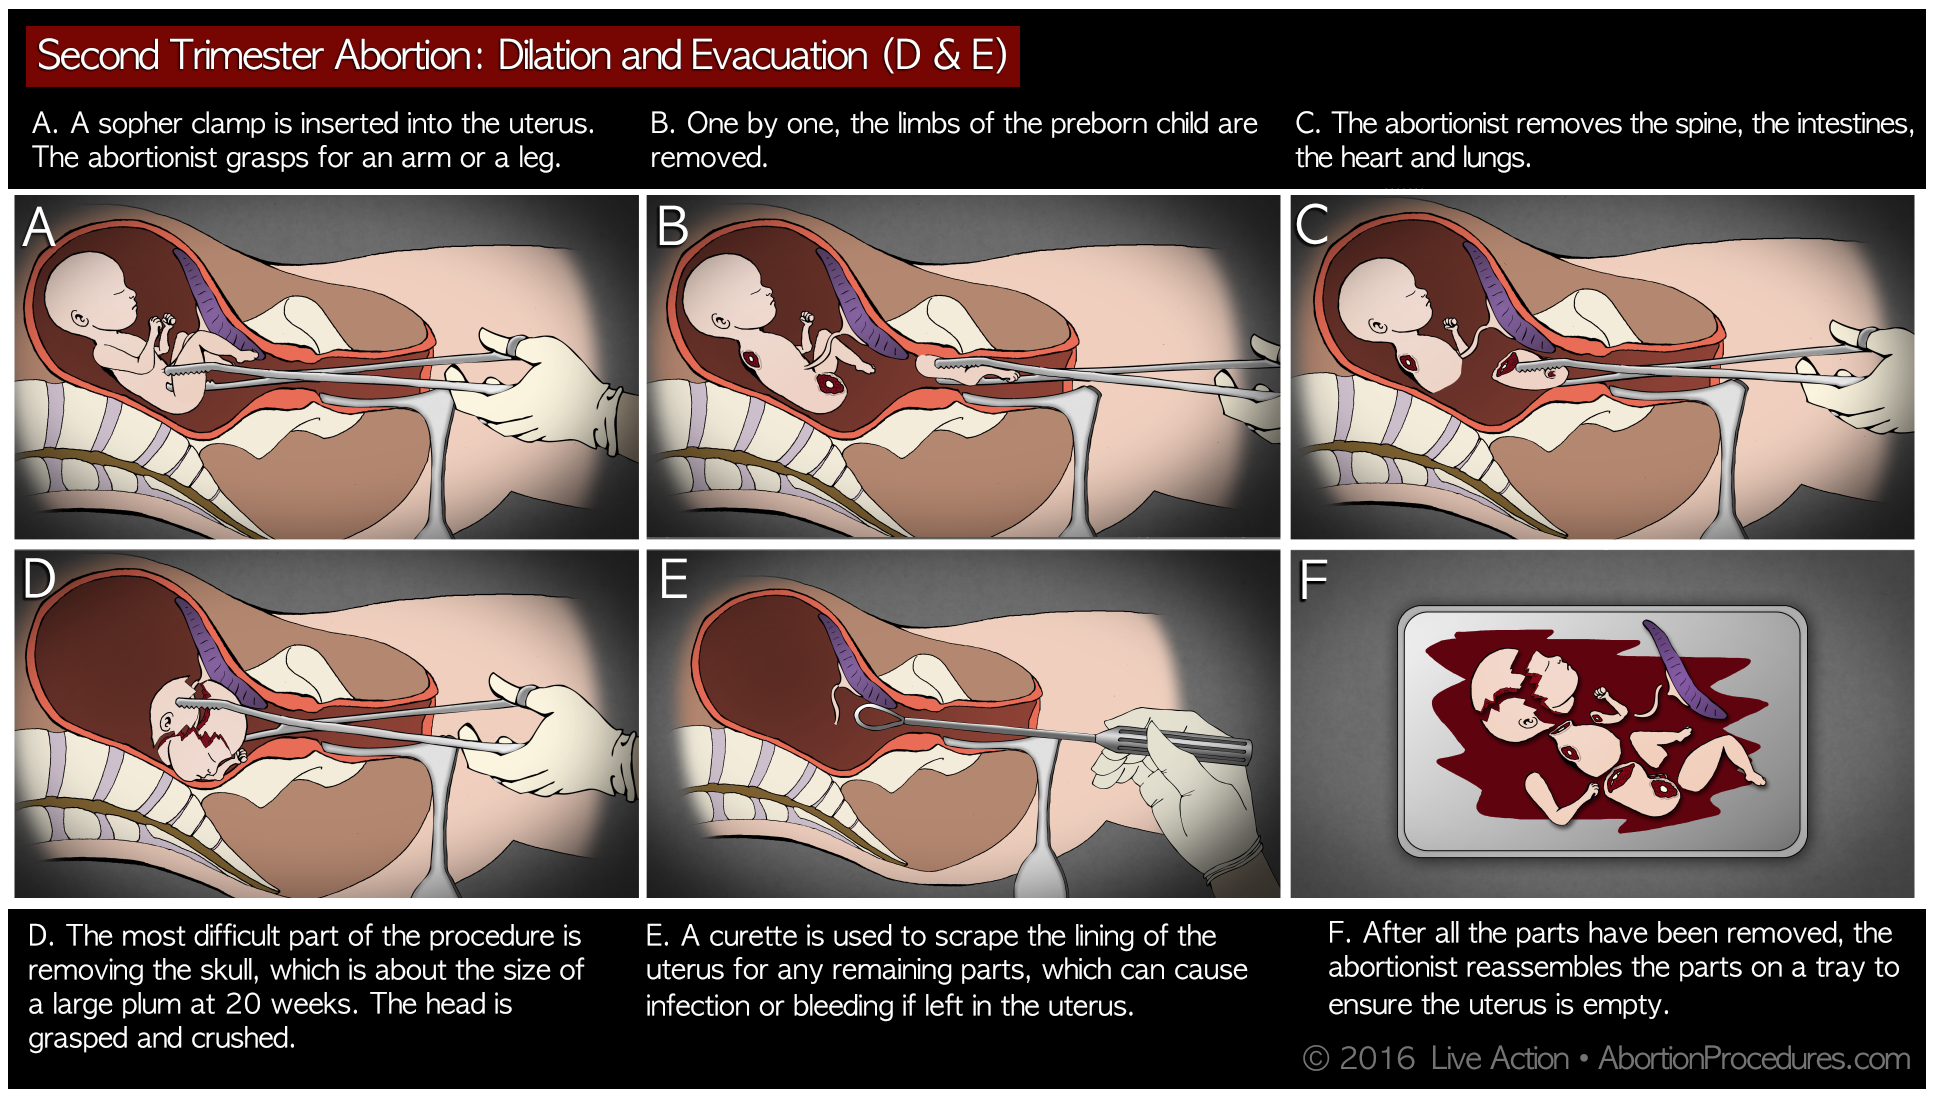 D&E abortion: the facts in pictures